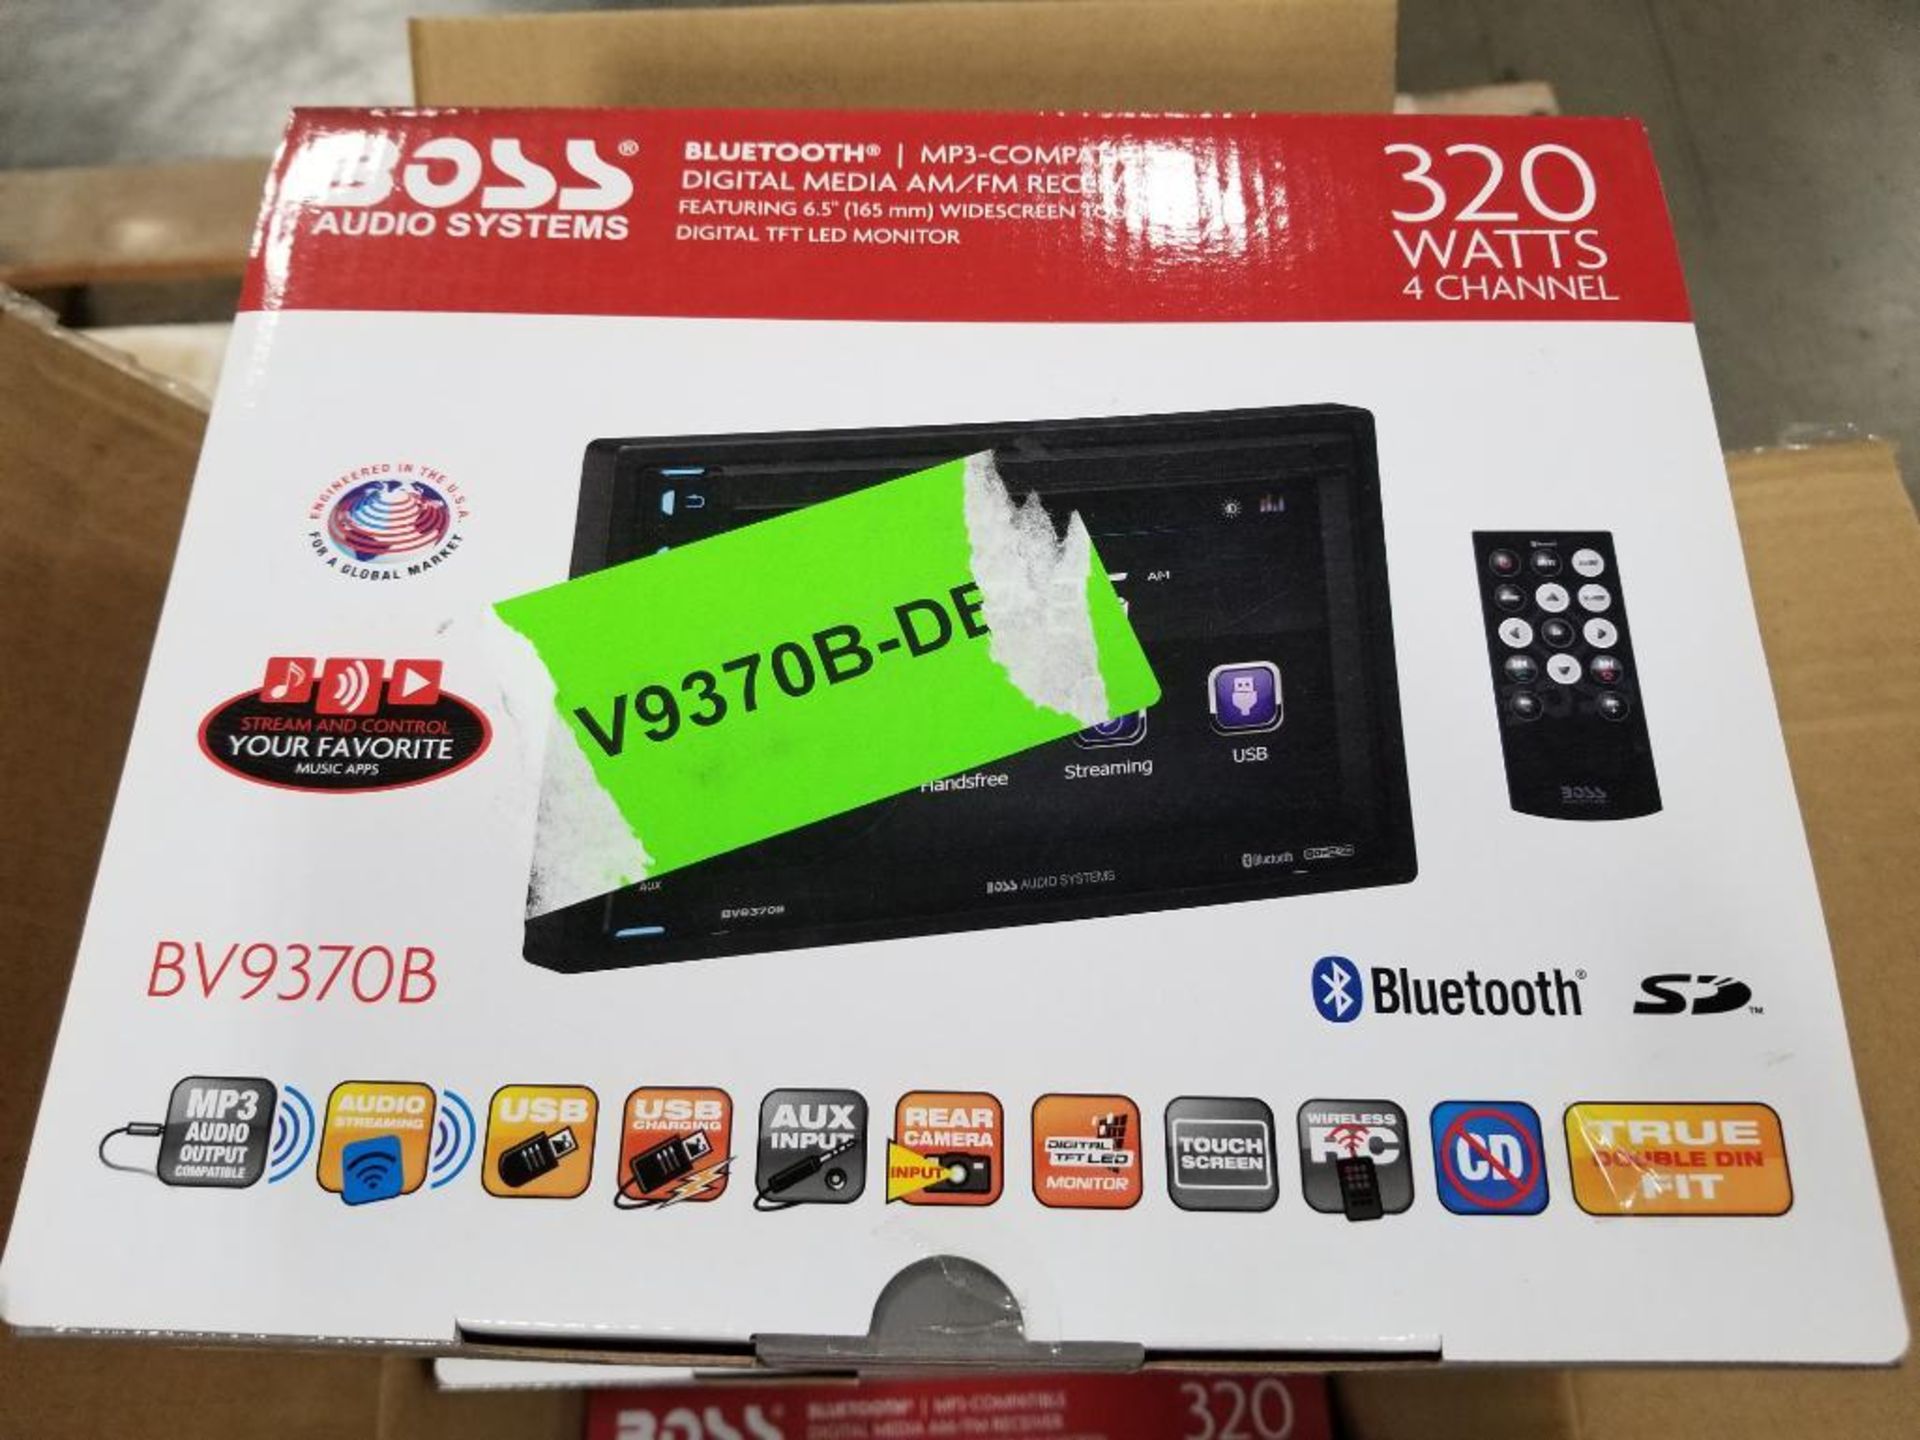 Qty 4 - BOSS Audio Systems BV9370B 320W, 4-channel, bluetooth, MP3 compatible digital media player. - Image 2 of 3